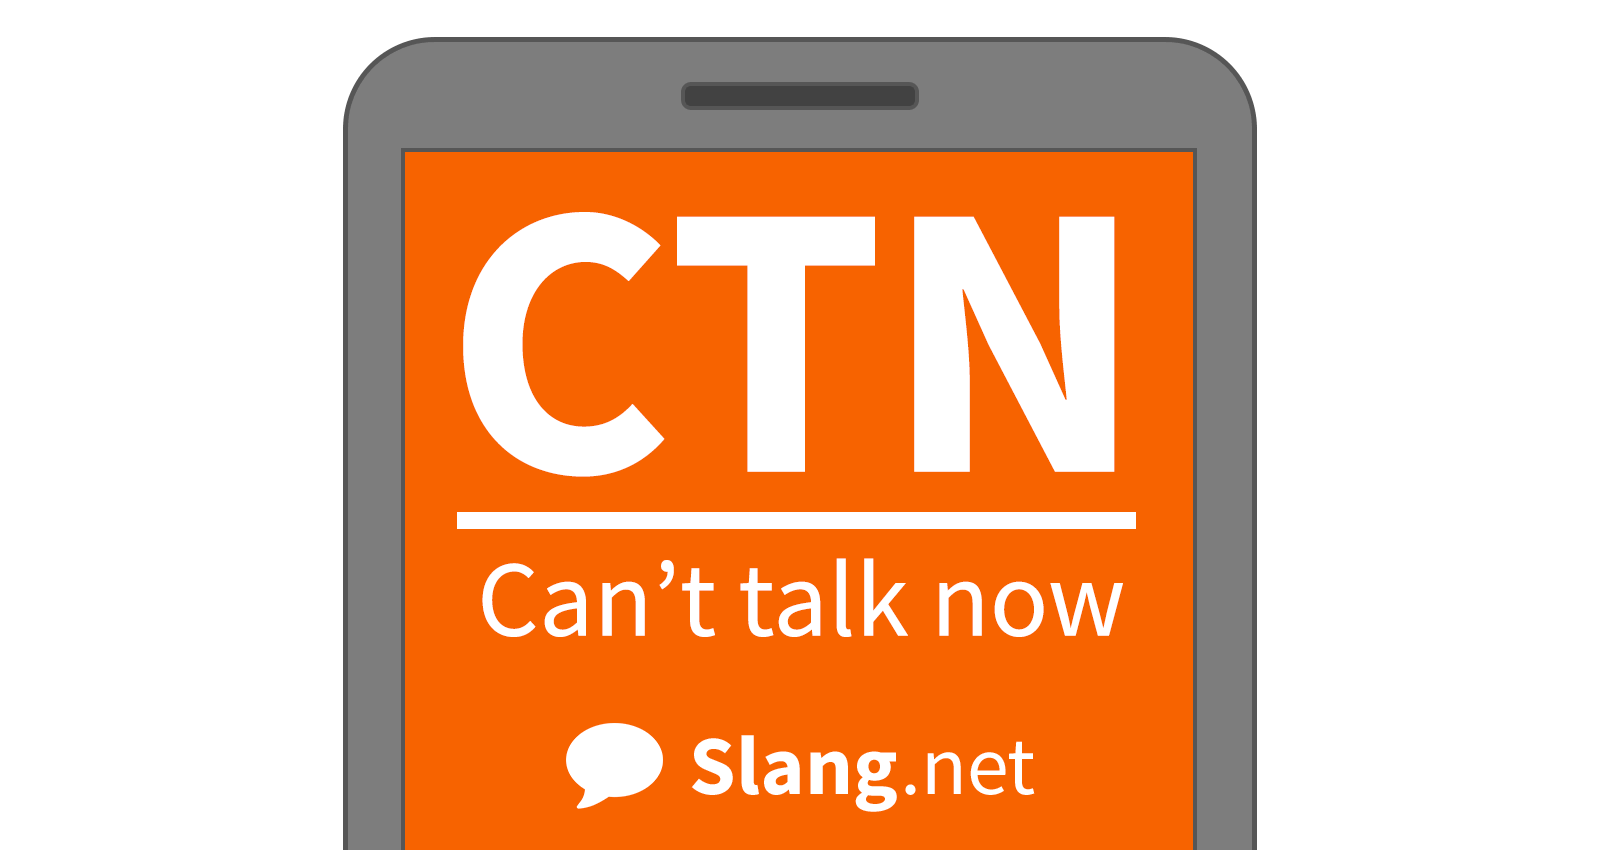 You'll likely see CTN in messages